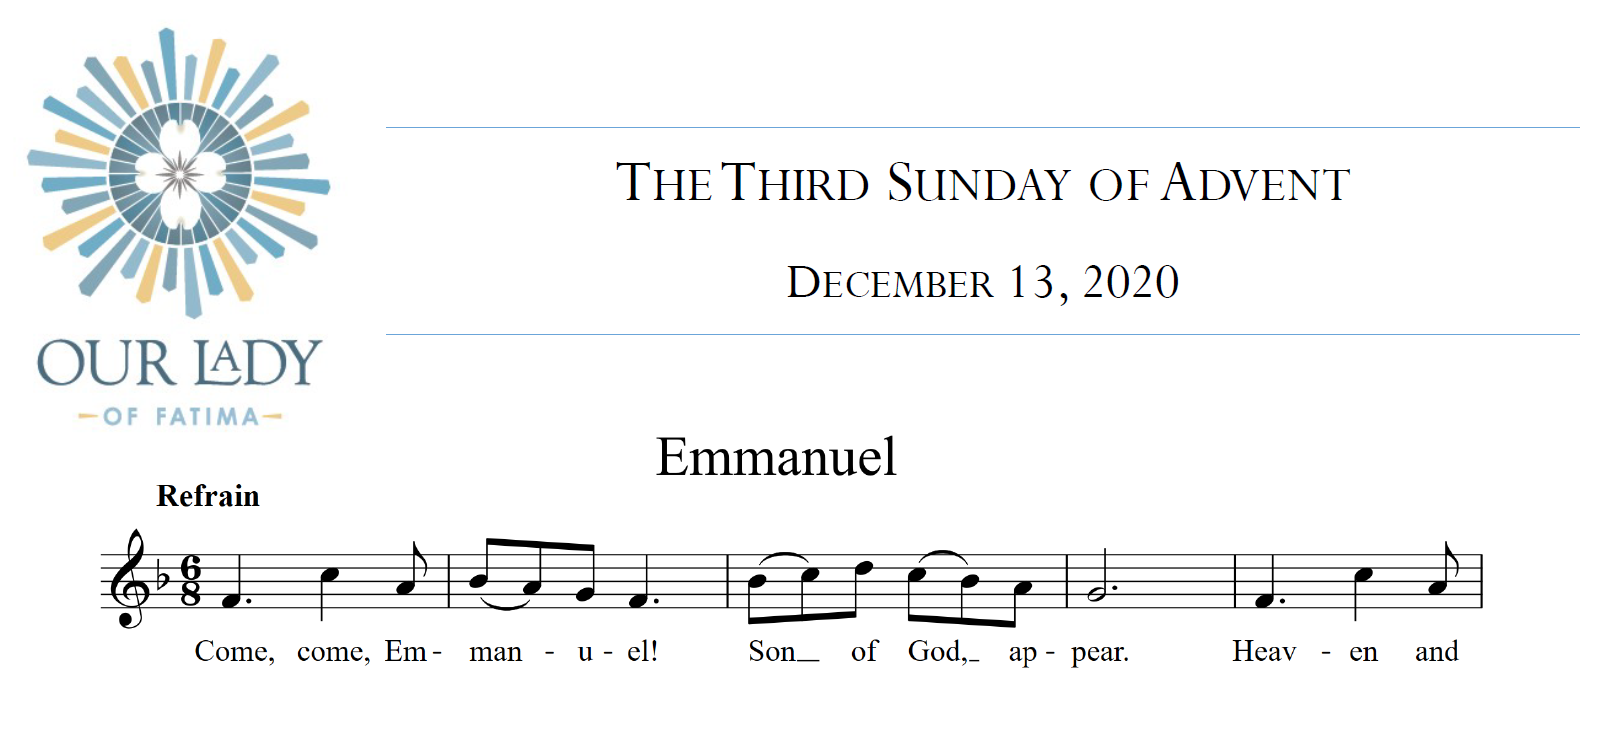 Worship Aid for The Third Sunday of Advent